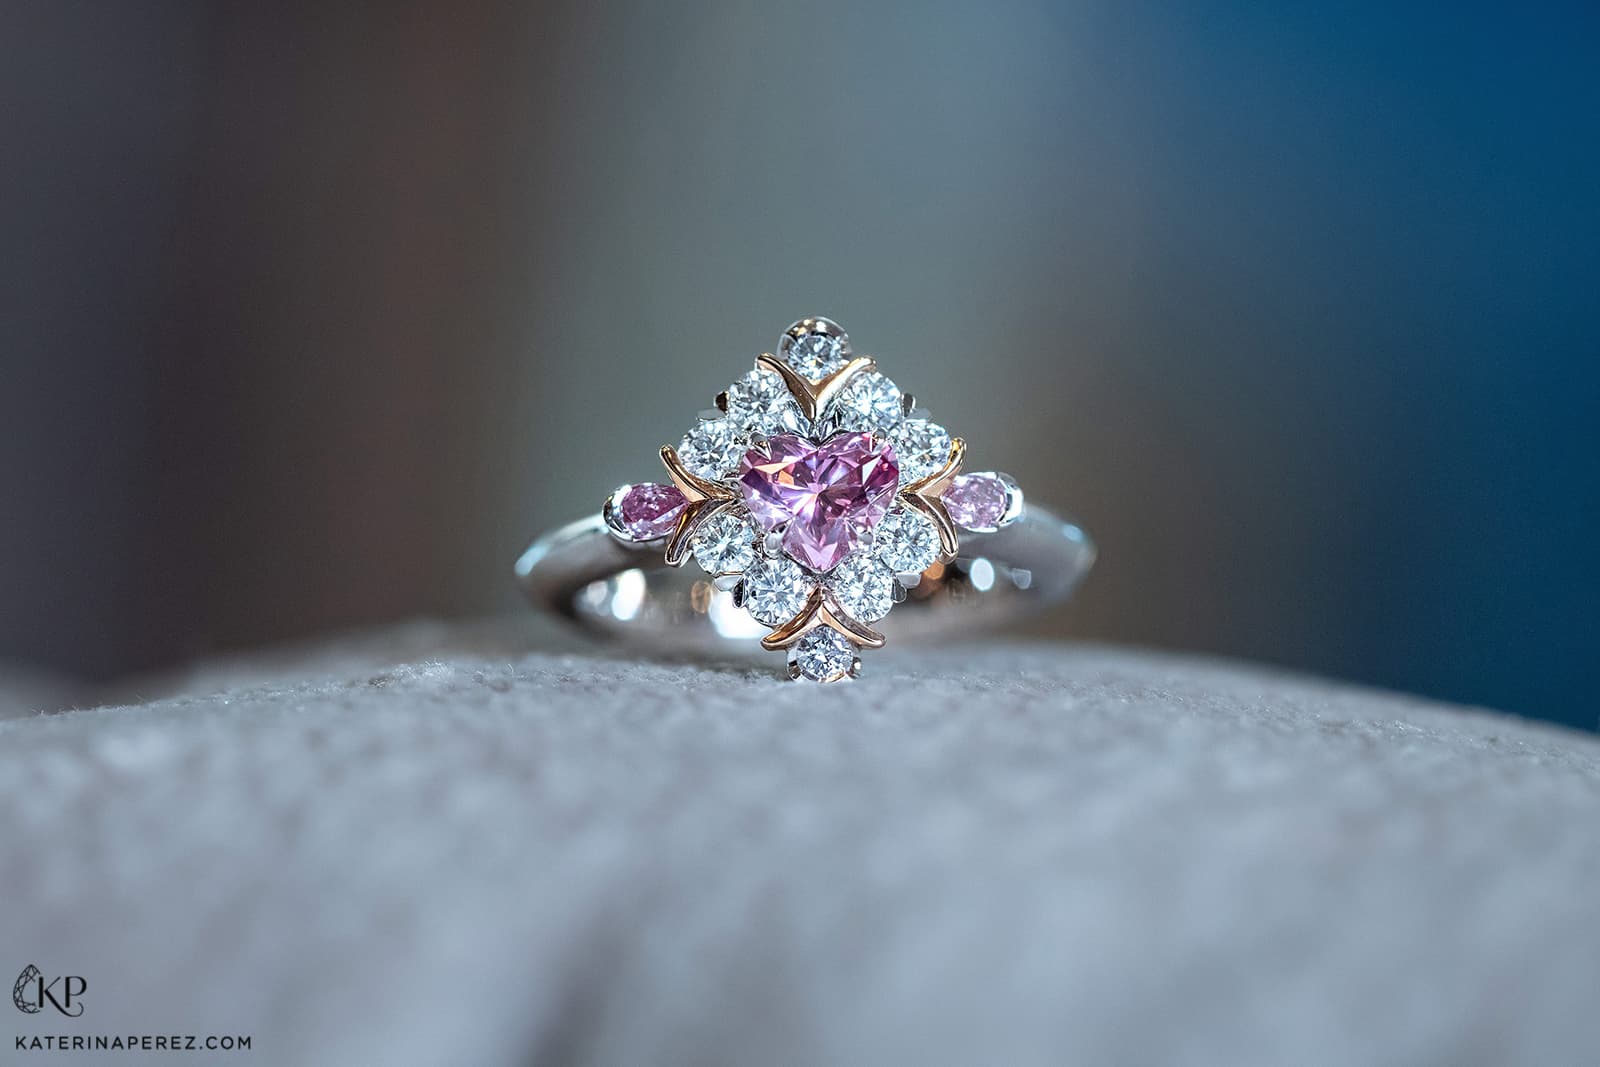 Calleija 'Couture' collection ‘Iamore’ ring with Argyle Purplish Pink Tender 0.56ct heart shaped diamond, two rare Argyle blue diamonds, Argyle pink pear shaped diamonds and colourless diamonds in platinum and rose gold